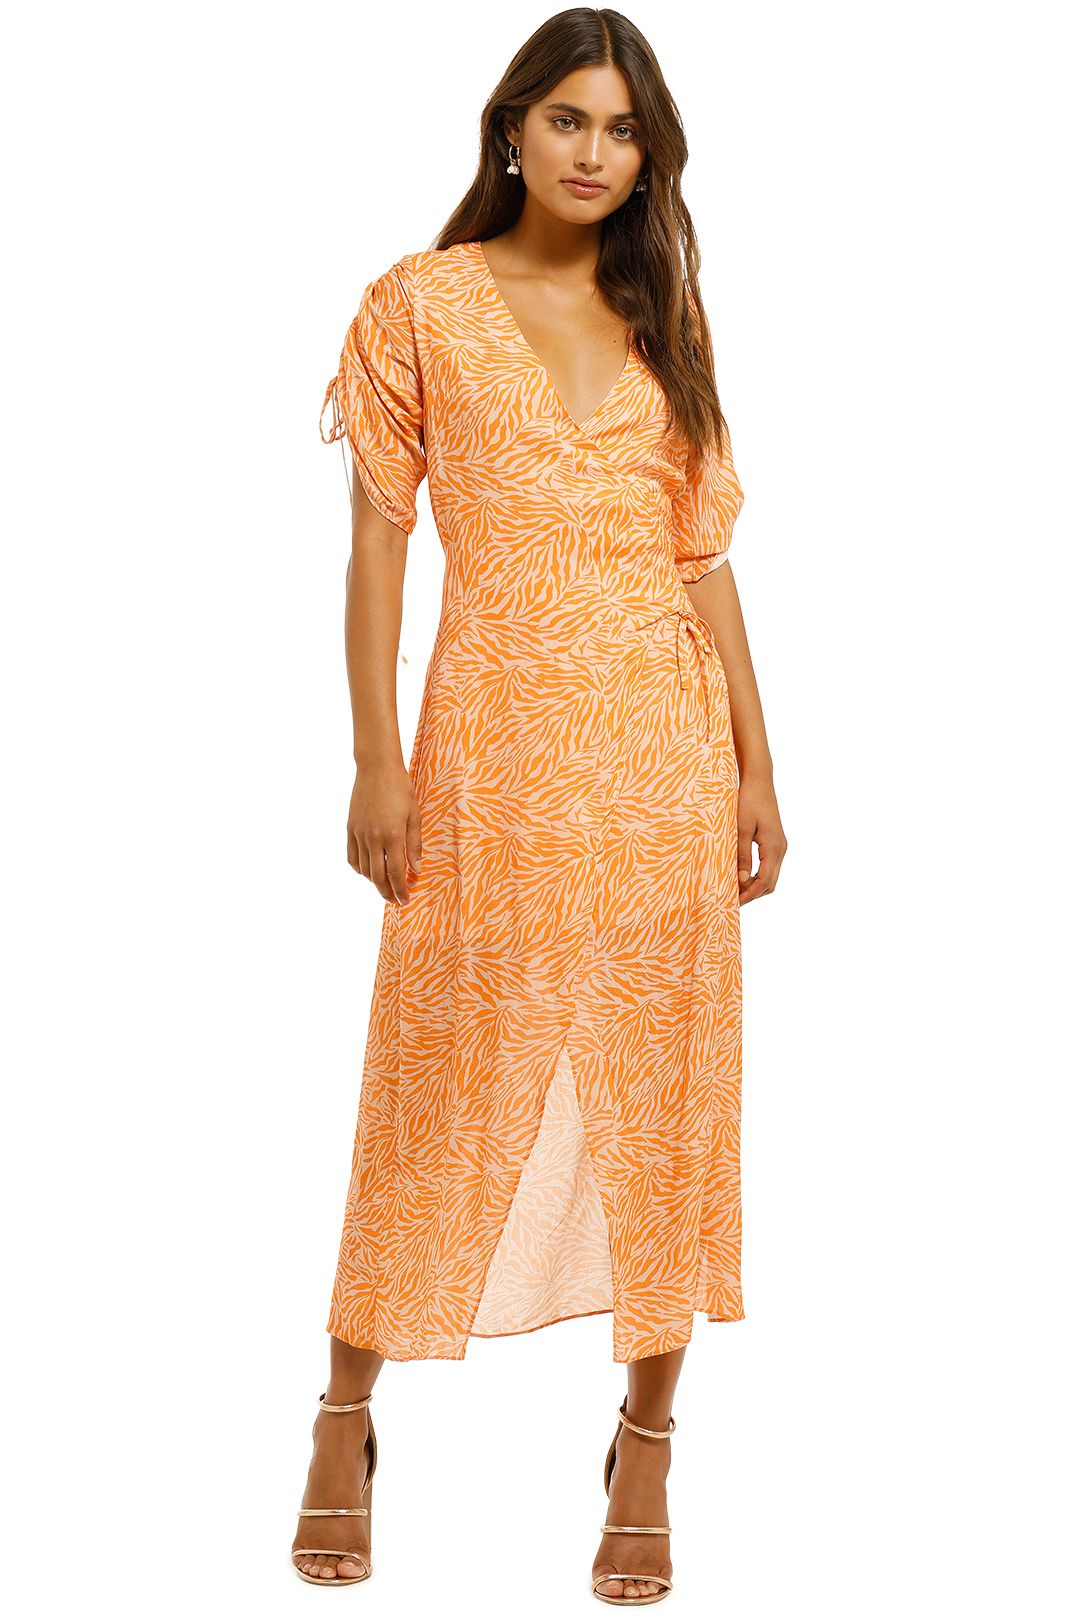 Suboo-Sienna-Wrapped-Dress-Orange-Front